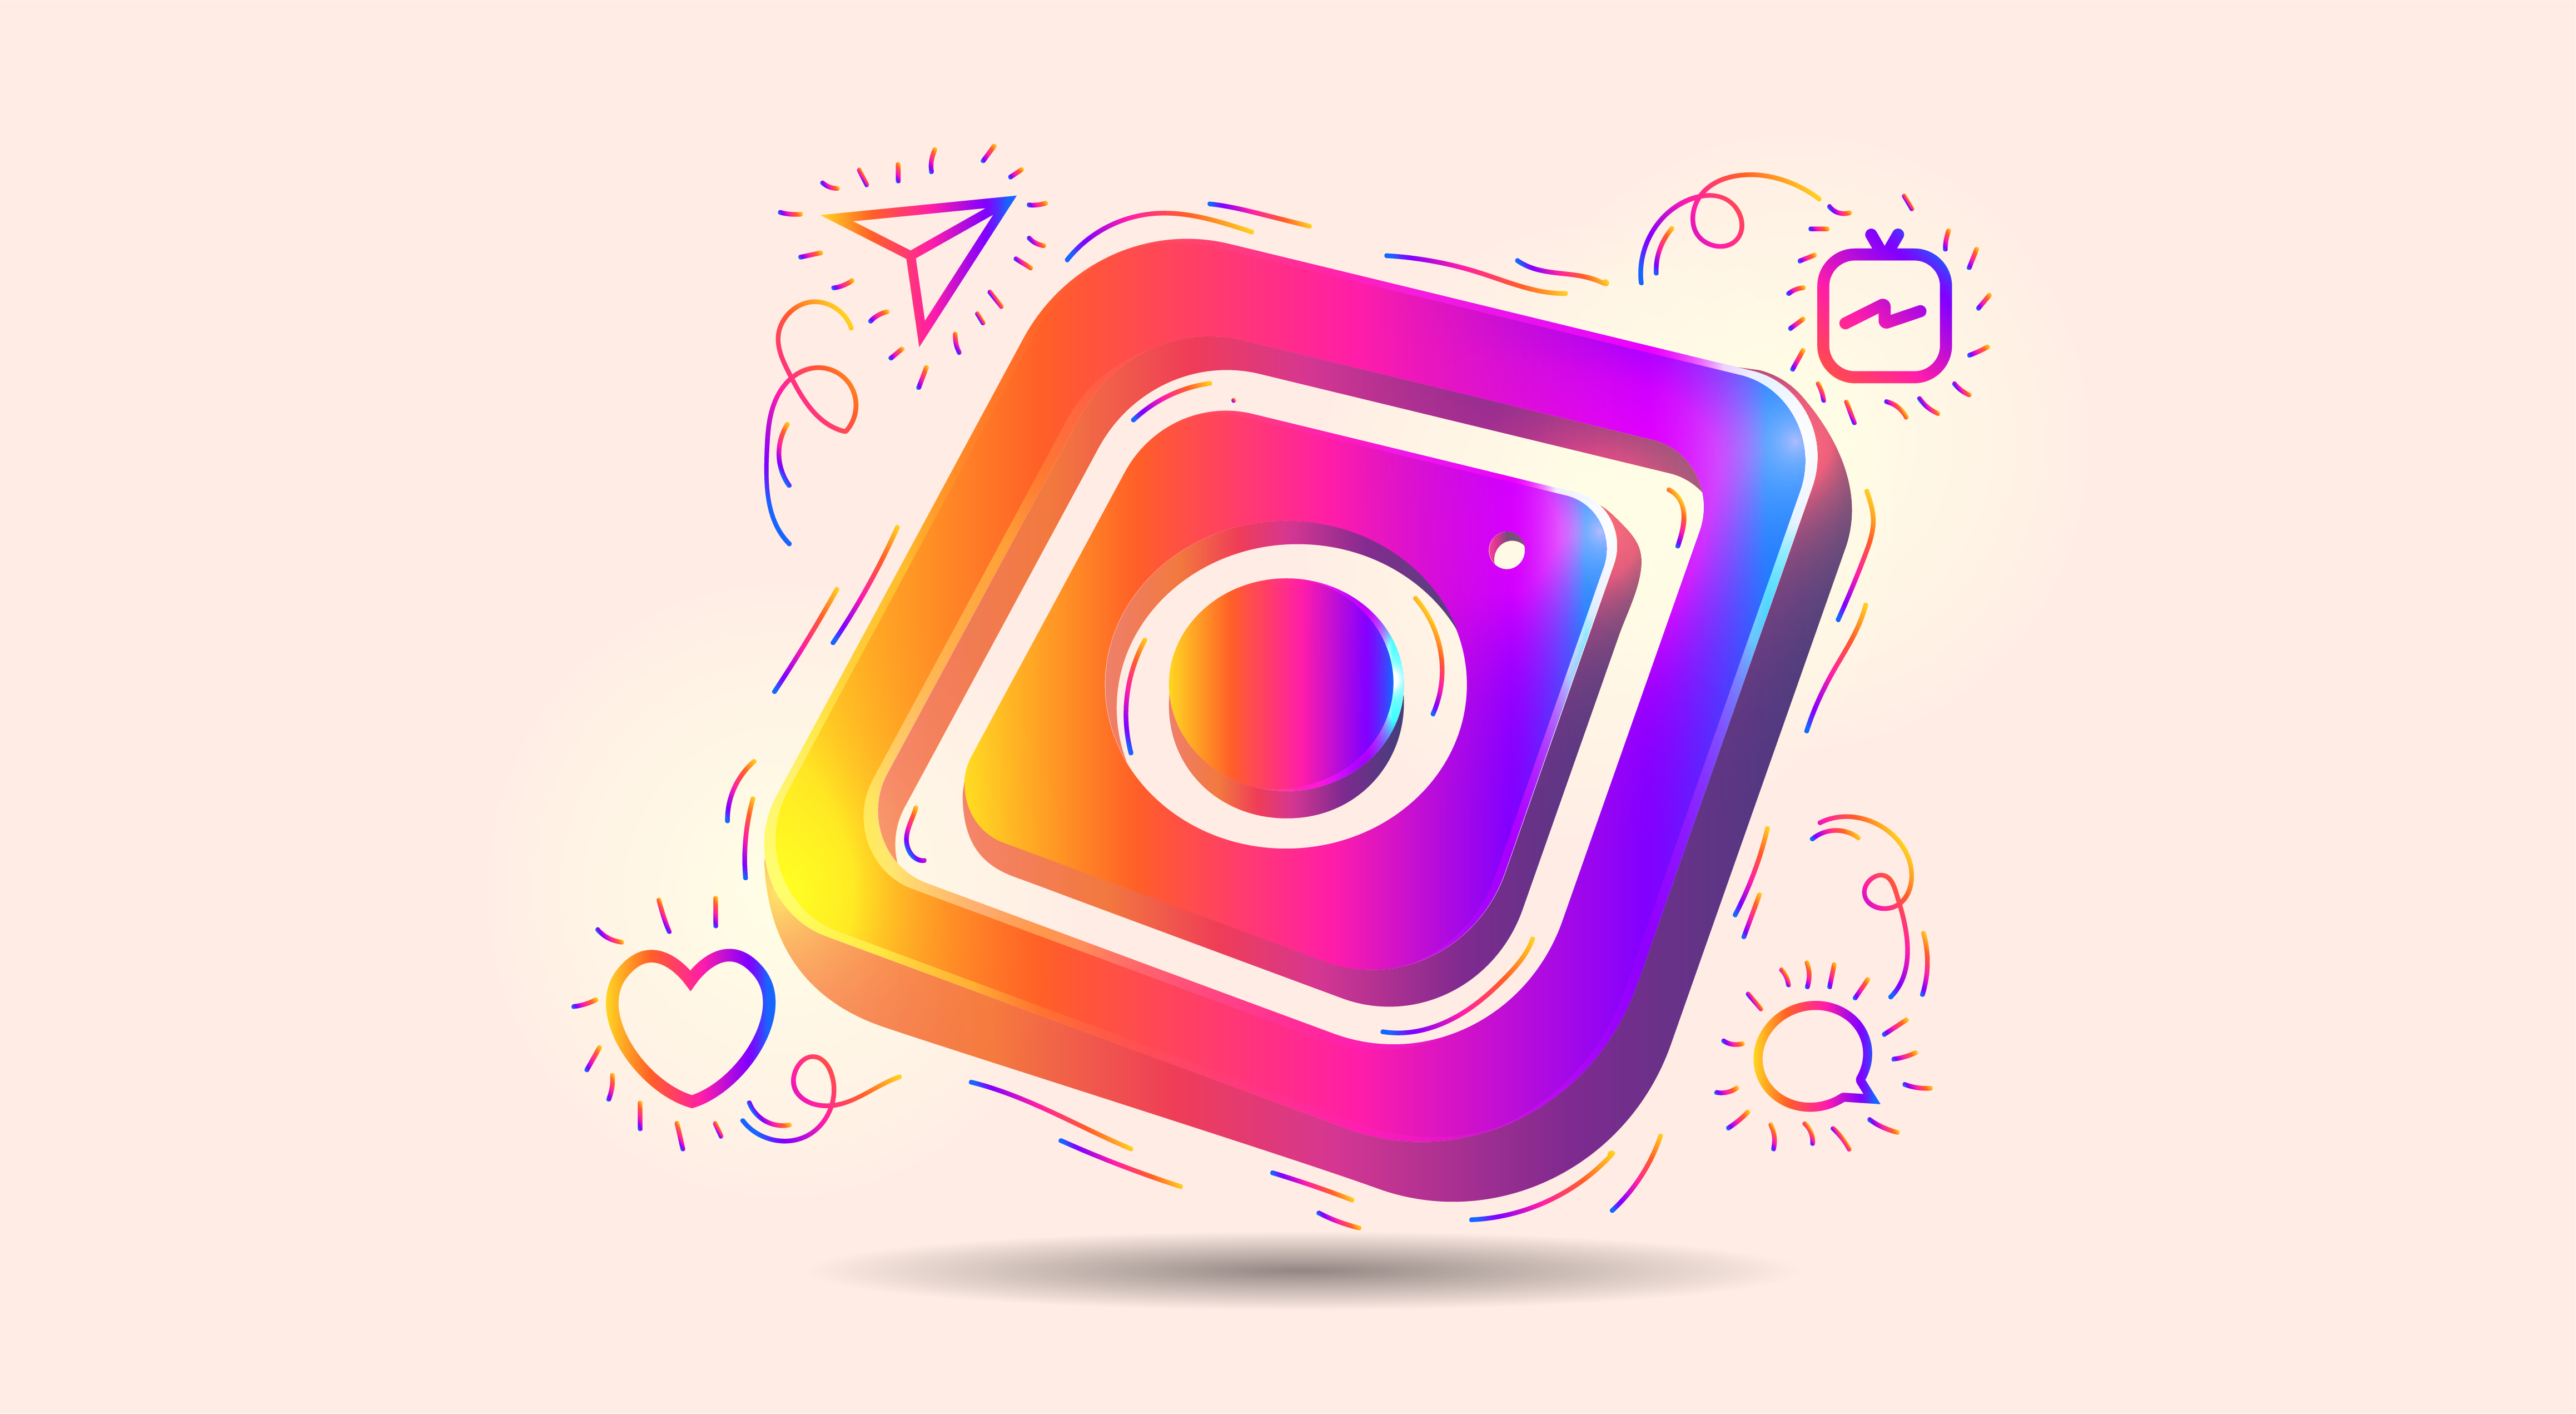 5 Top Types of Content That Work on Instagram | Pepper Content